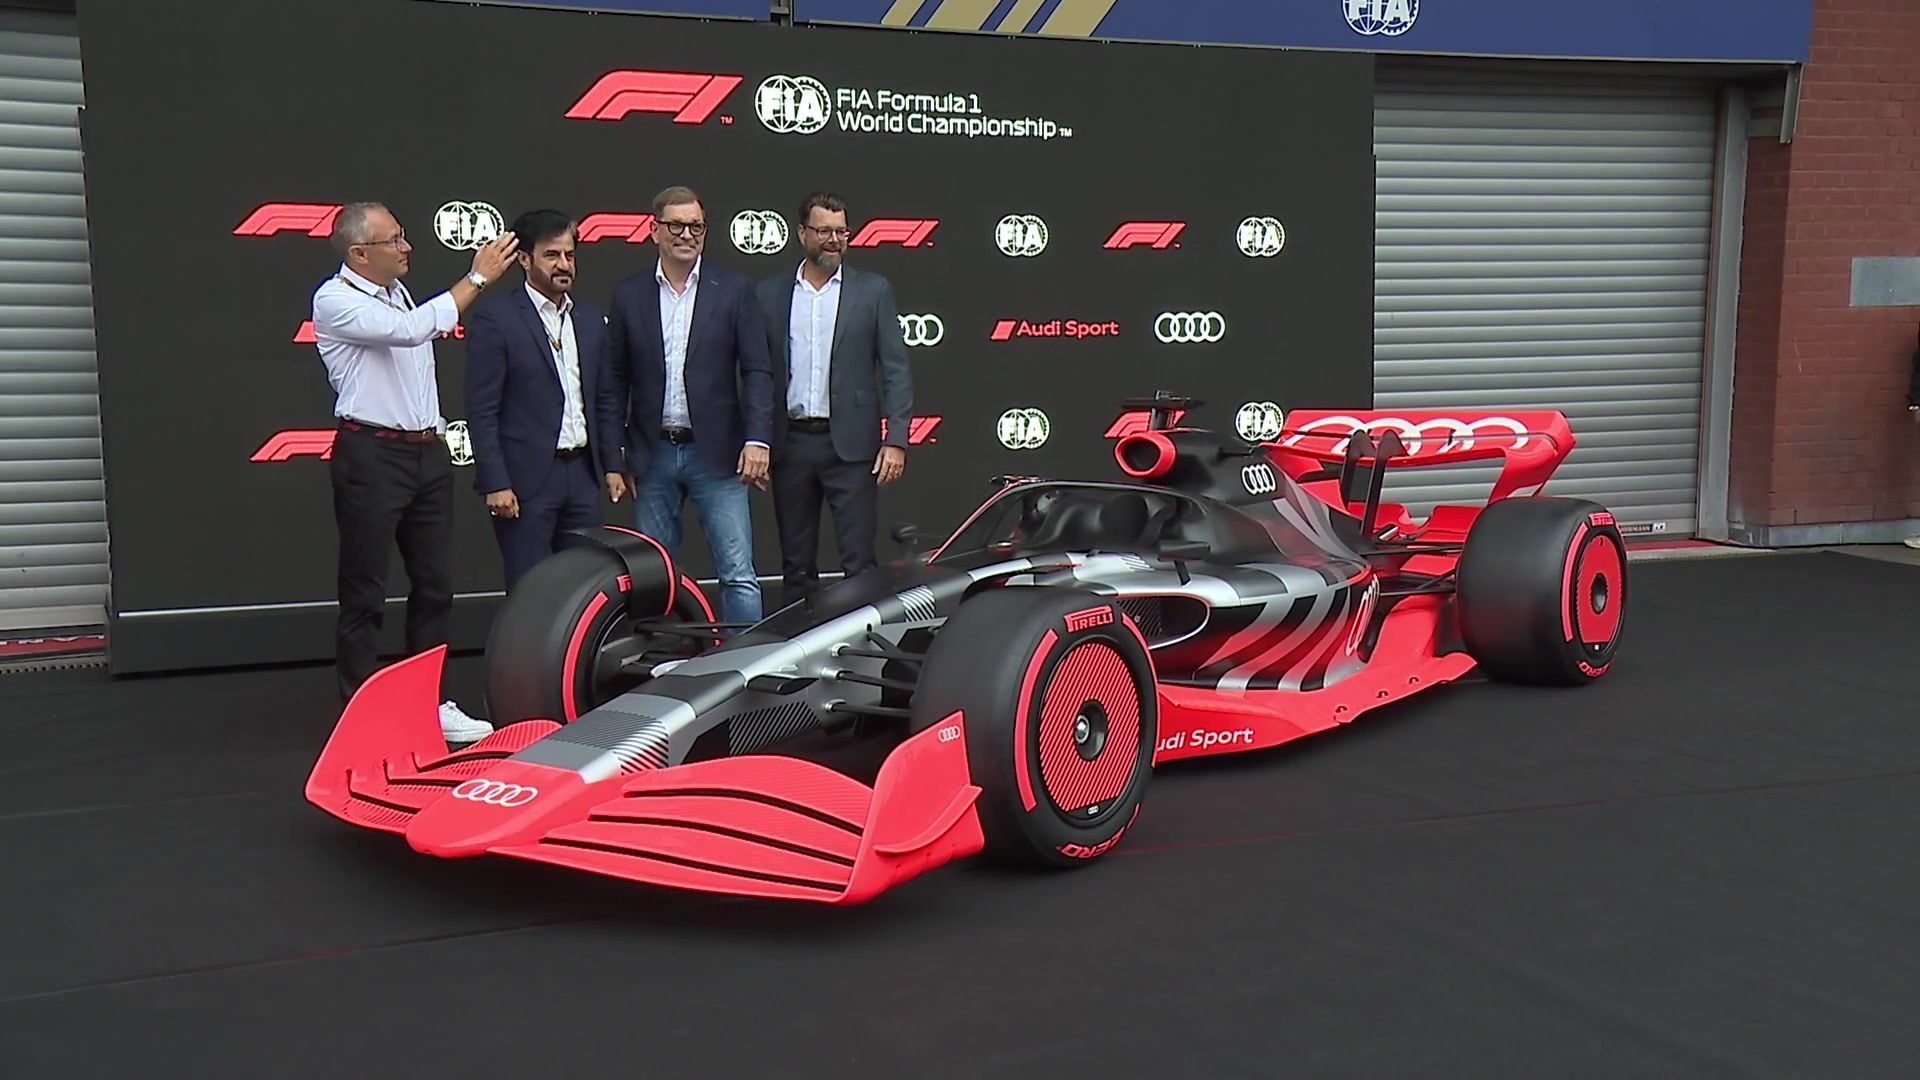 Show car with Audi F1 Launch livery unveiled Spa-Francorchamps